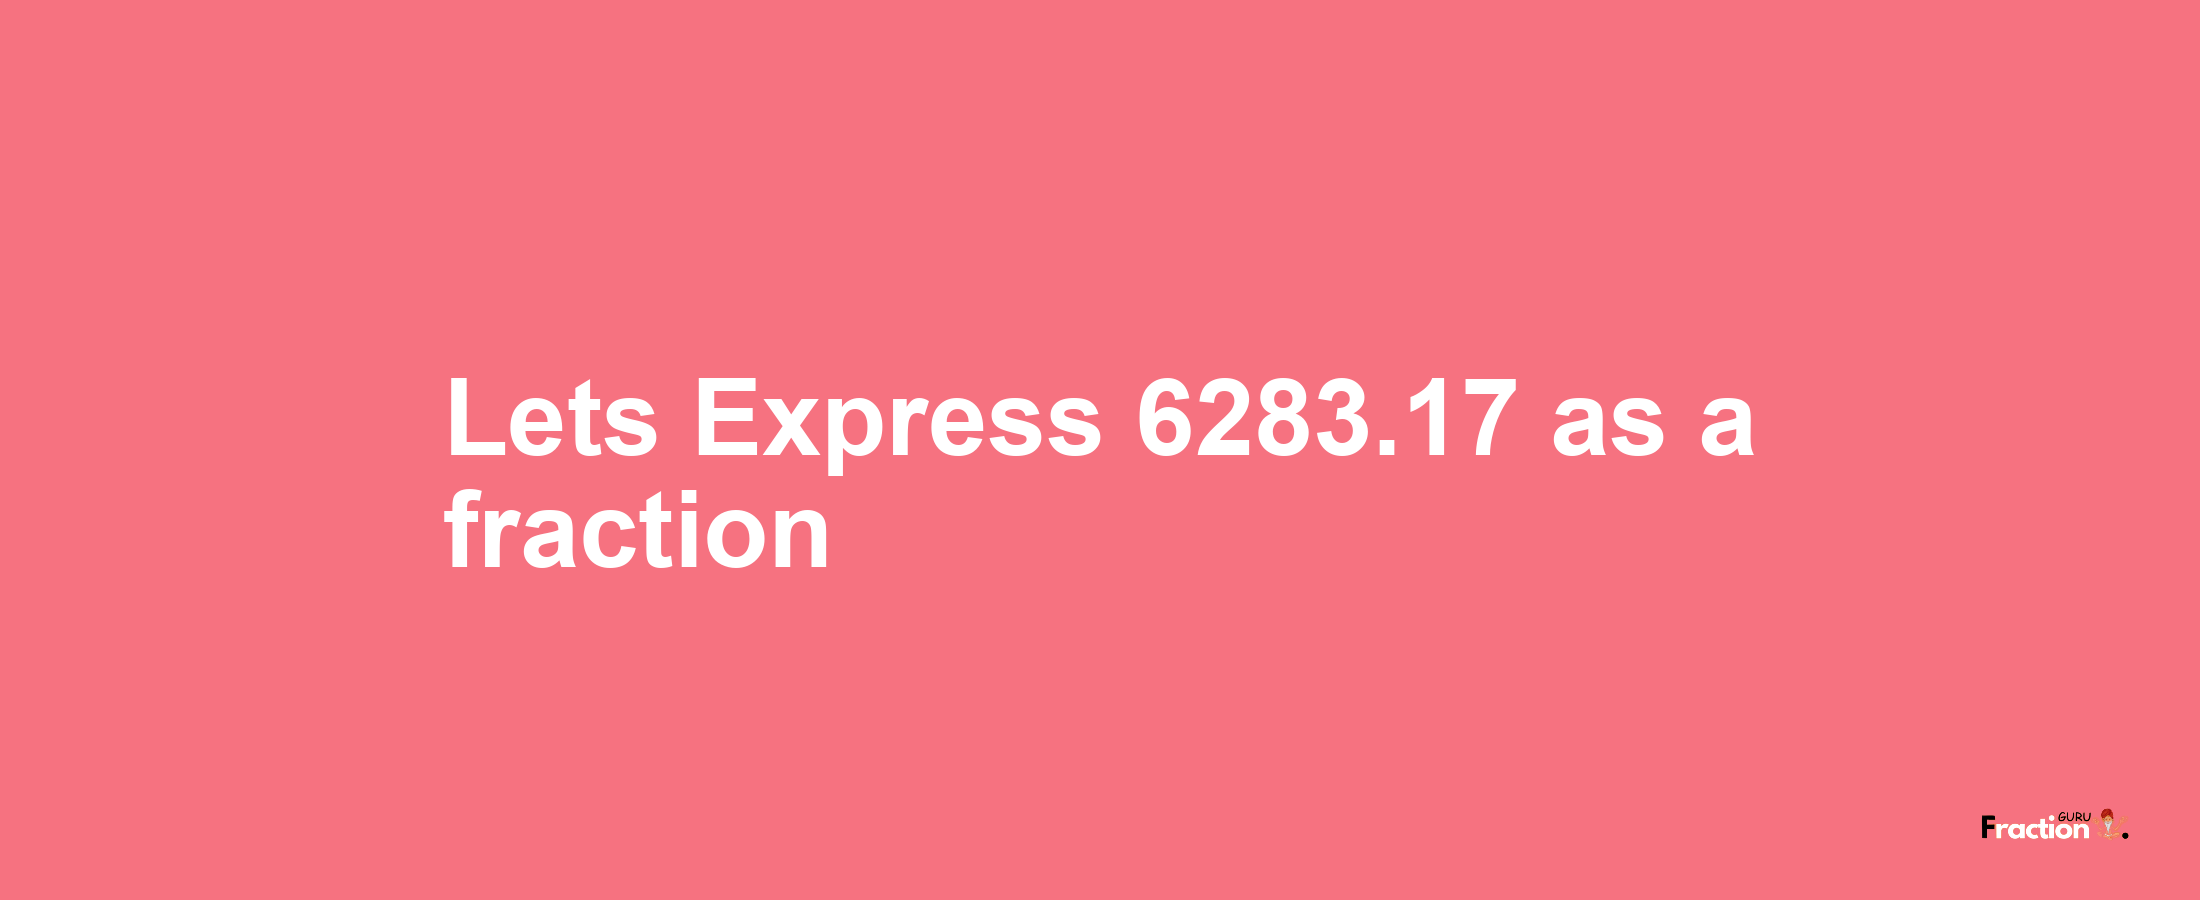 Lets Express 6283.17 as afraction